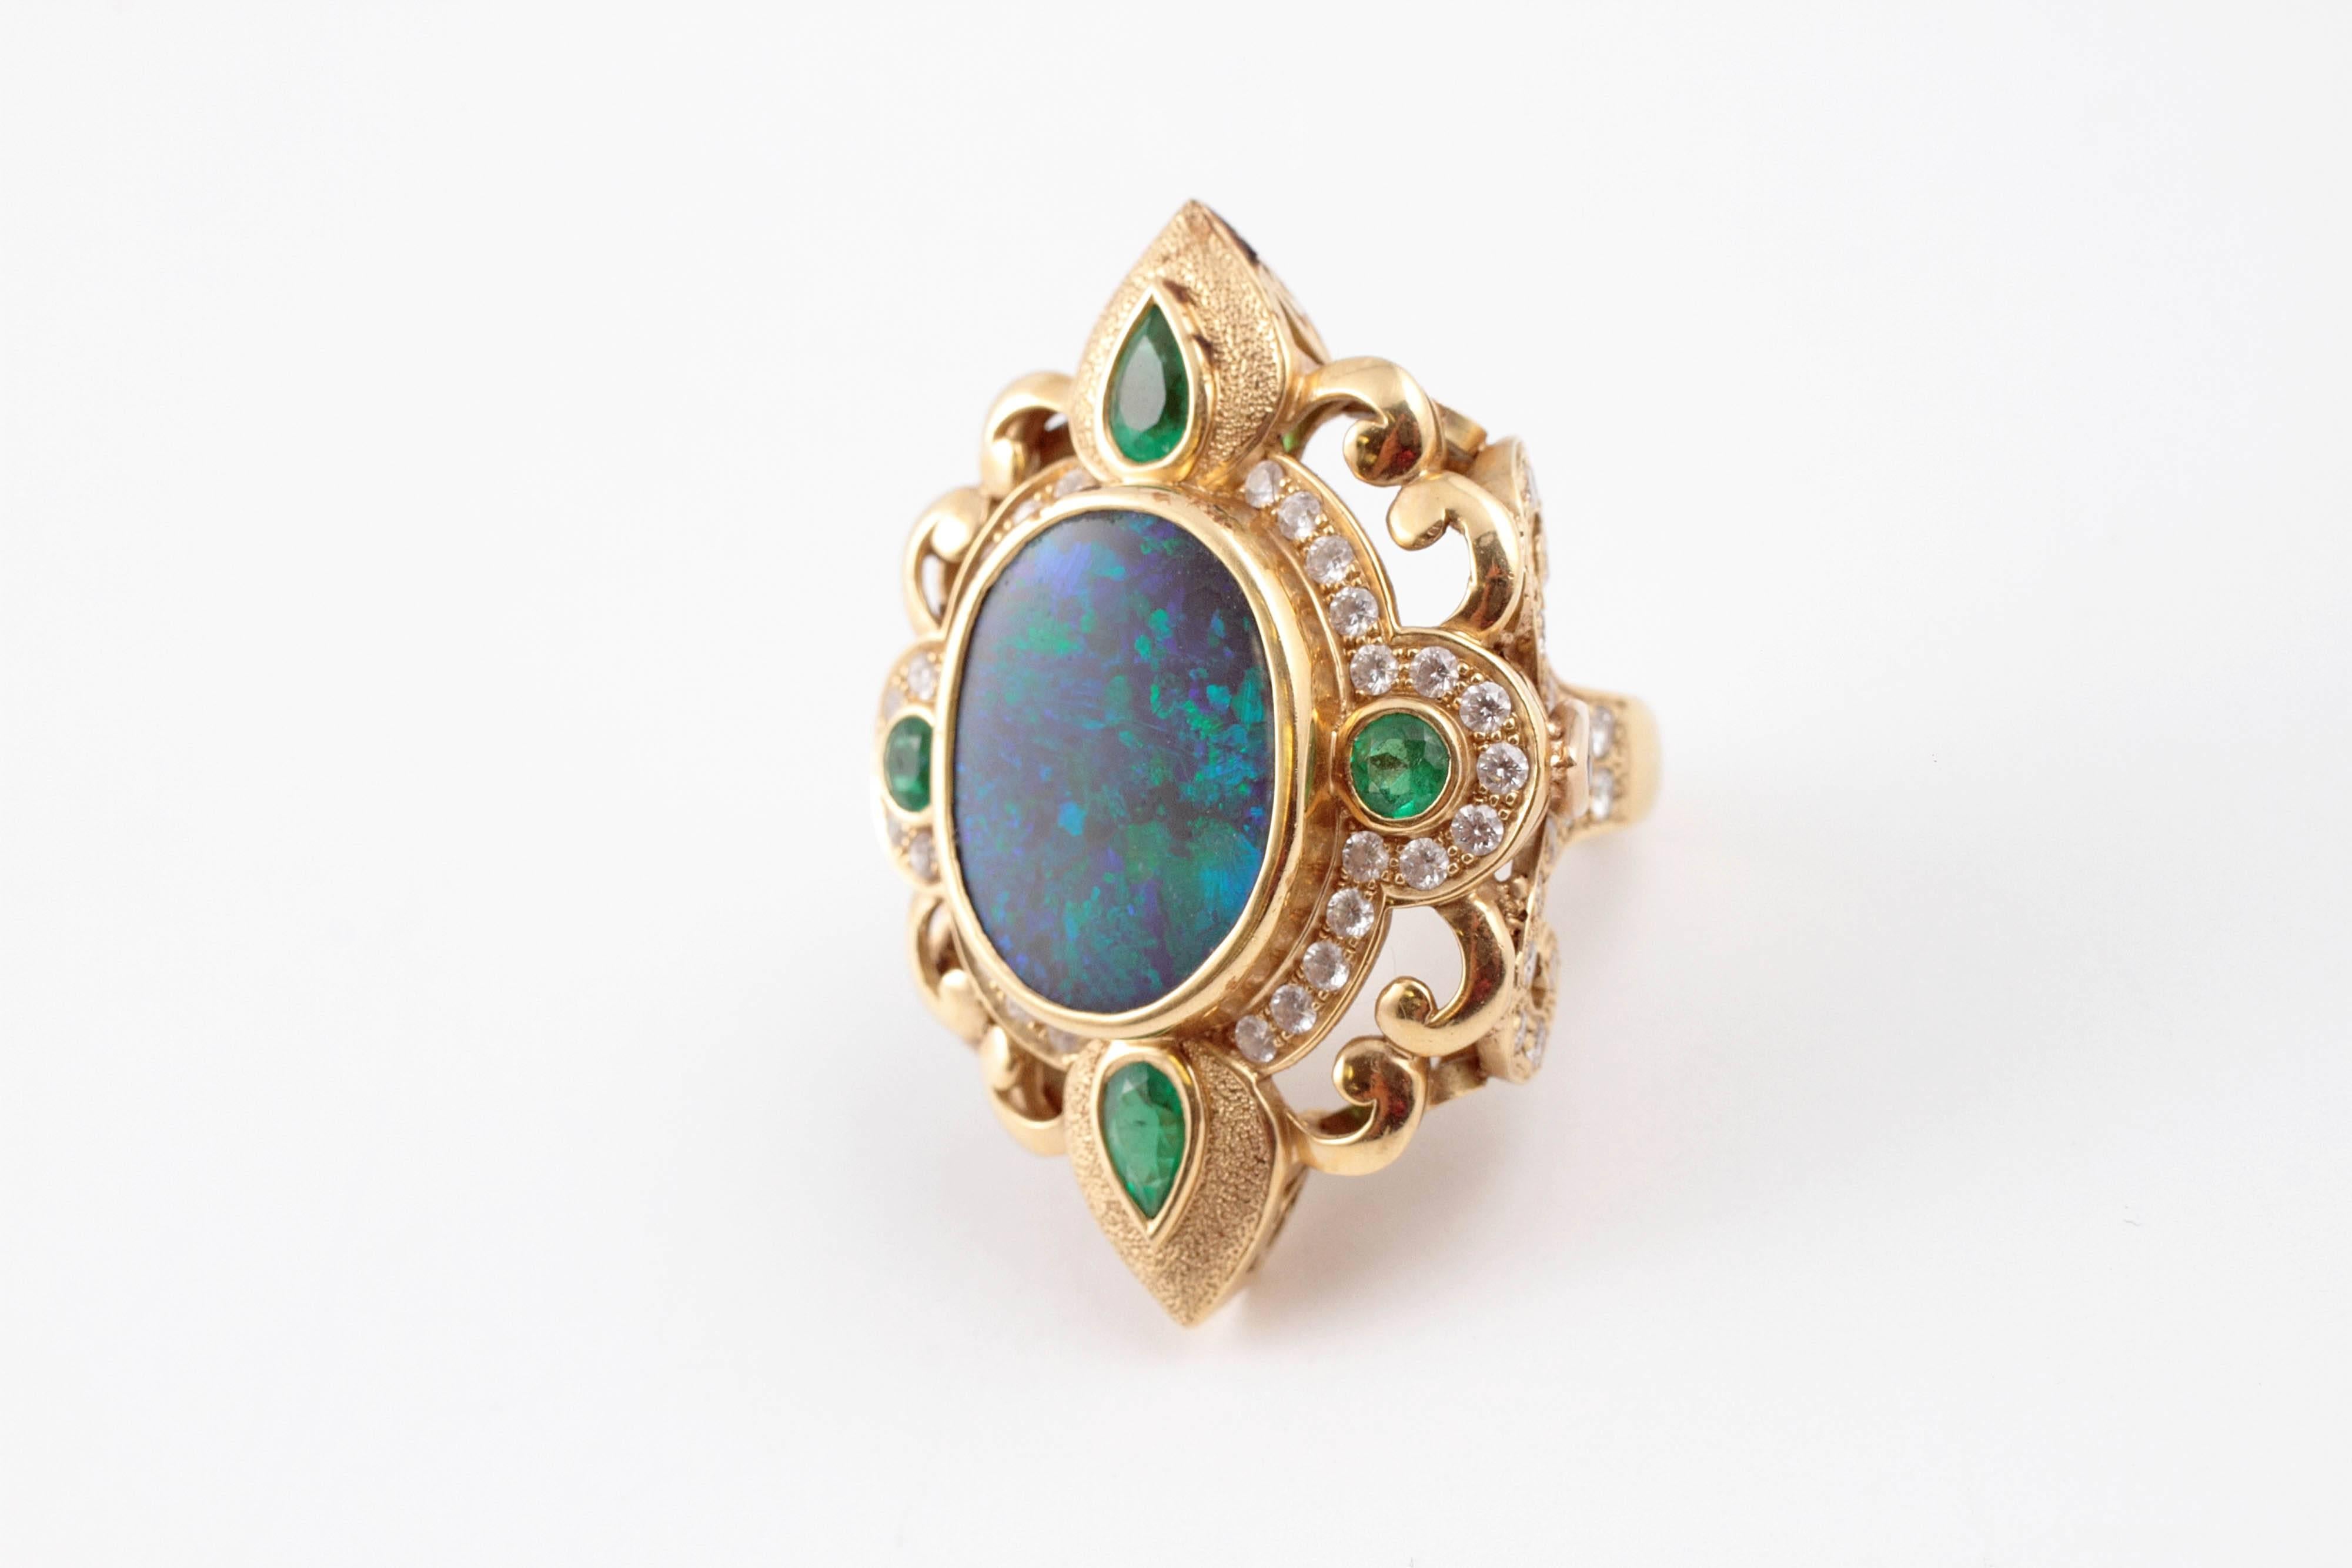 Boldly beautiful in green and blue opal.  Crevoshay's 7.33 carat black opal ring with stunning fire accented by 1.08 carats of emeralds and .74 carats of diamonds in 18 Karat yellow gold. Size 8.25. Sides are encrusted with diamonds.  